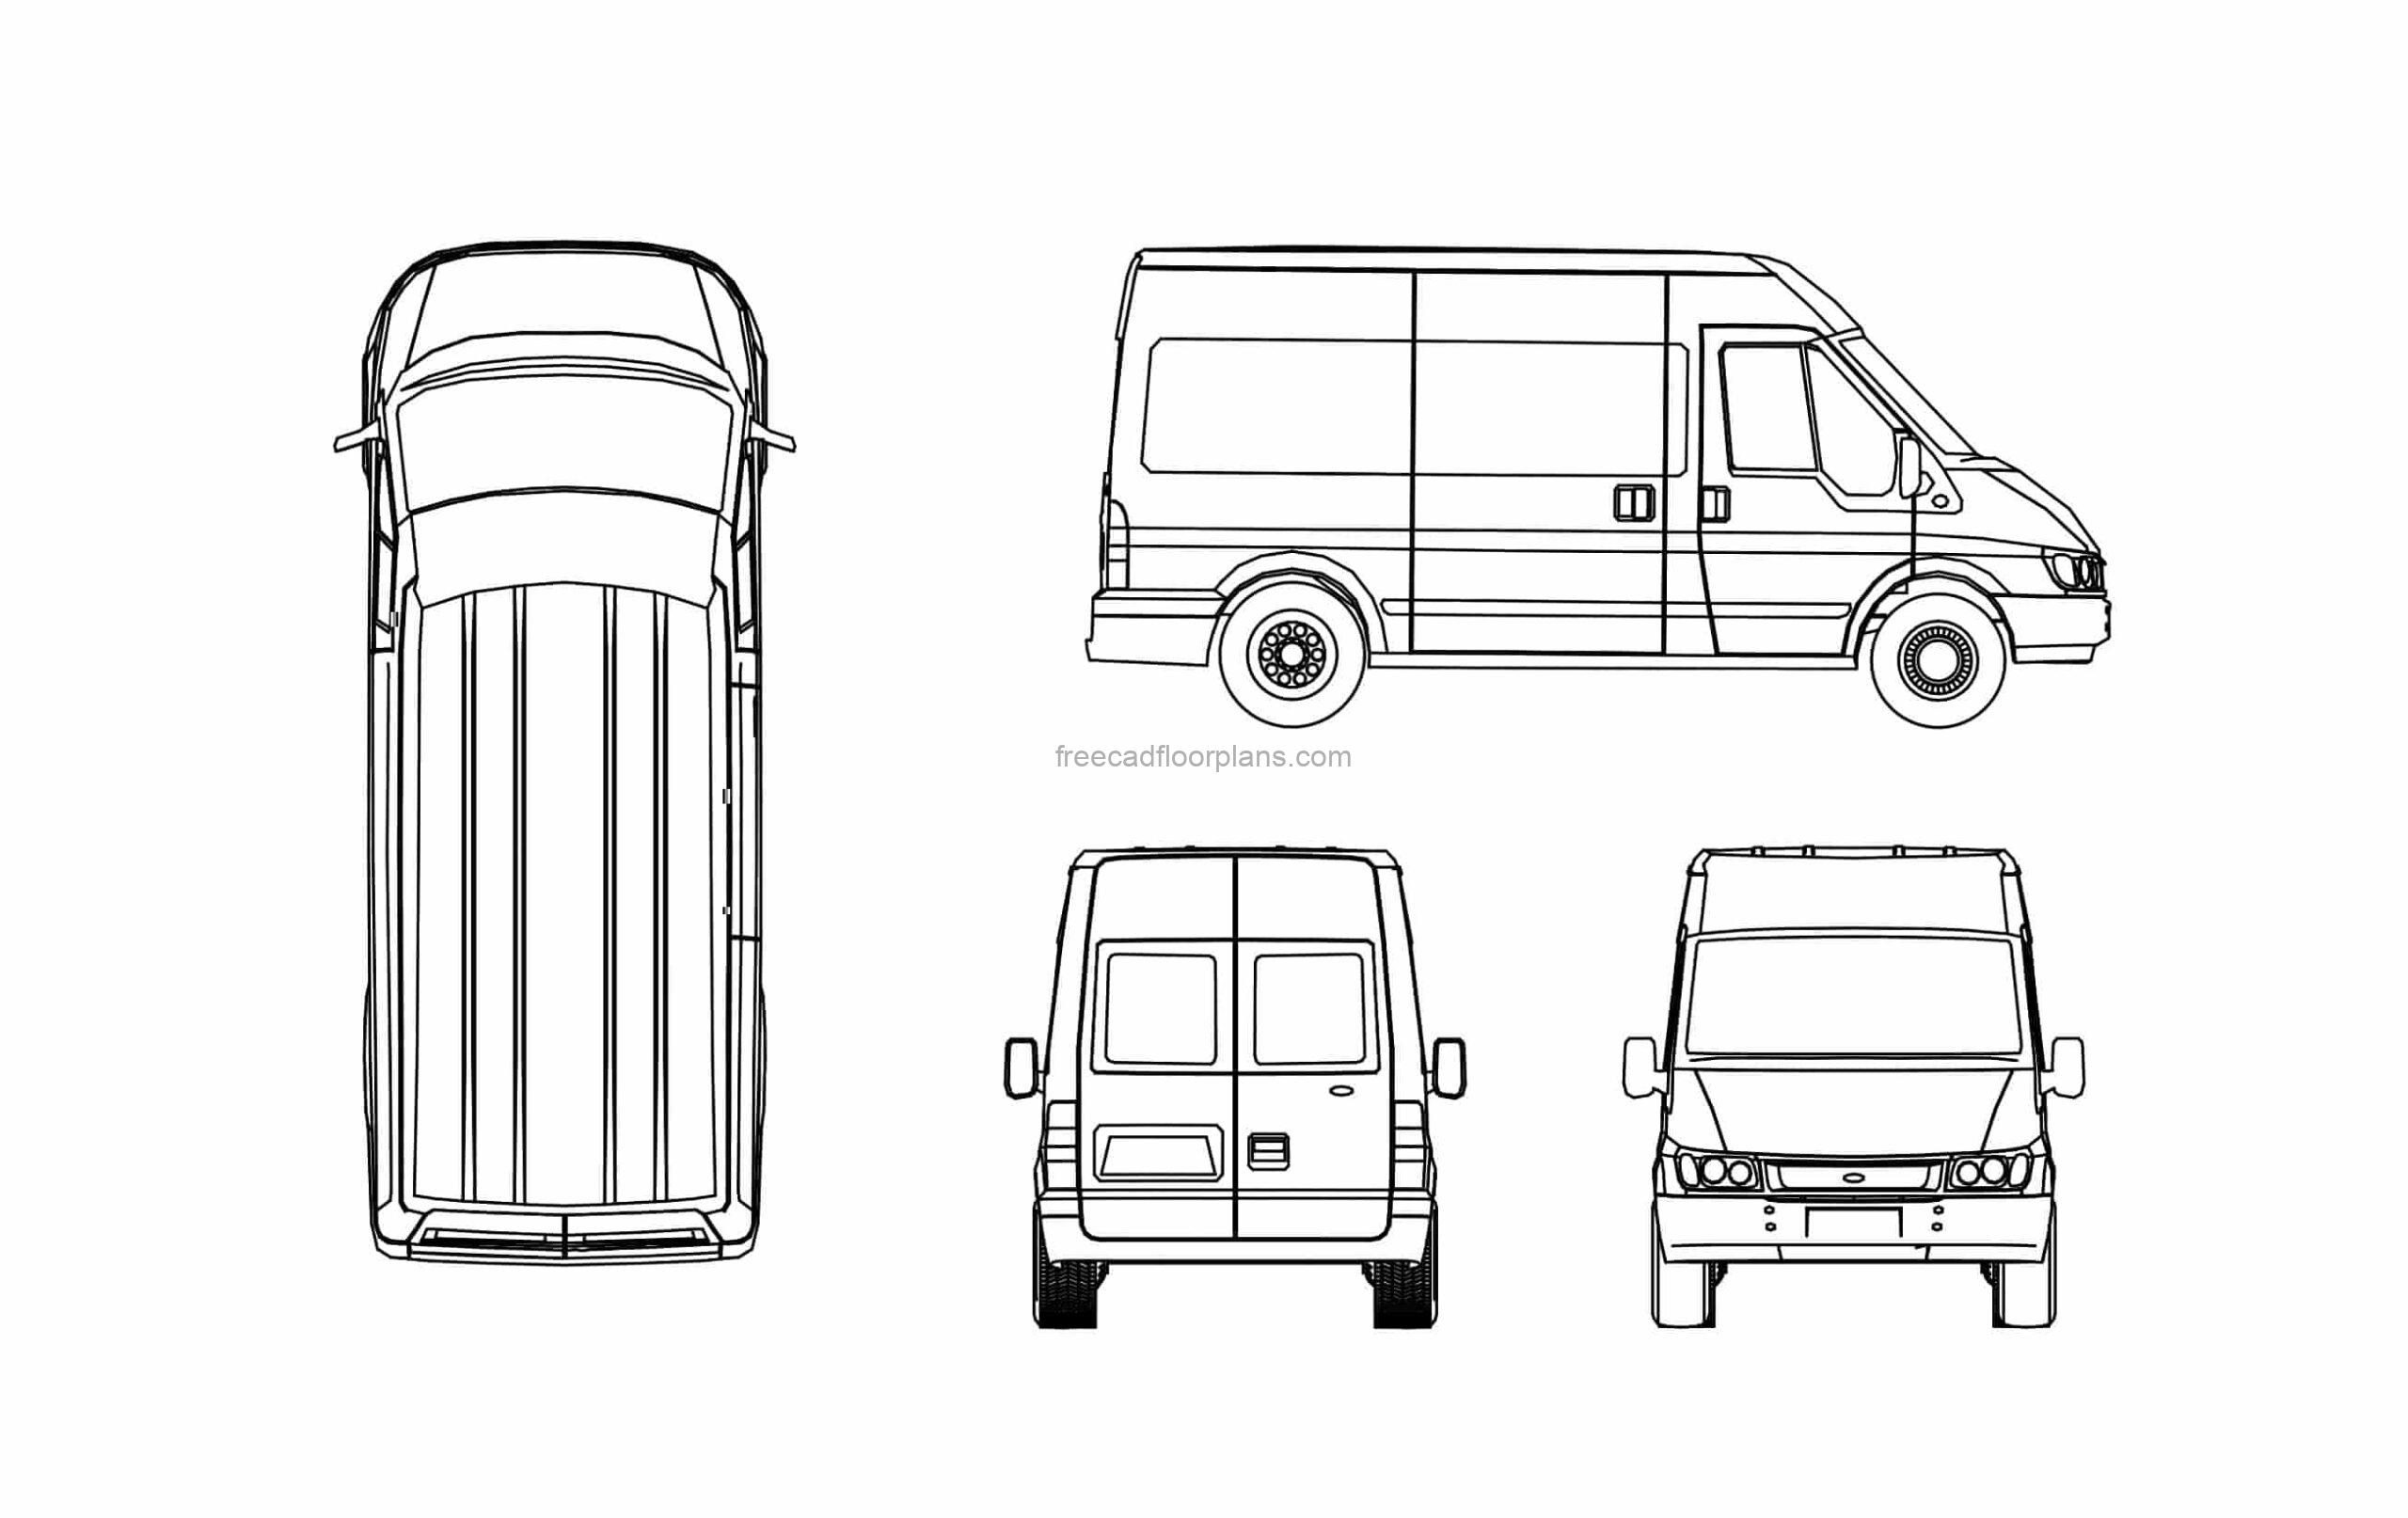 ford transit van dwg drawing for free download, all 2d views